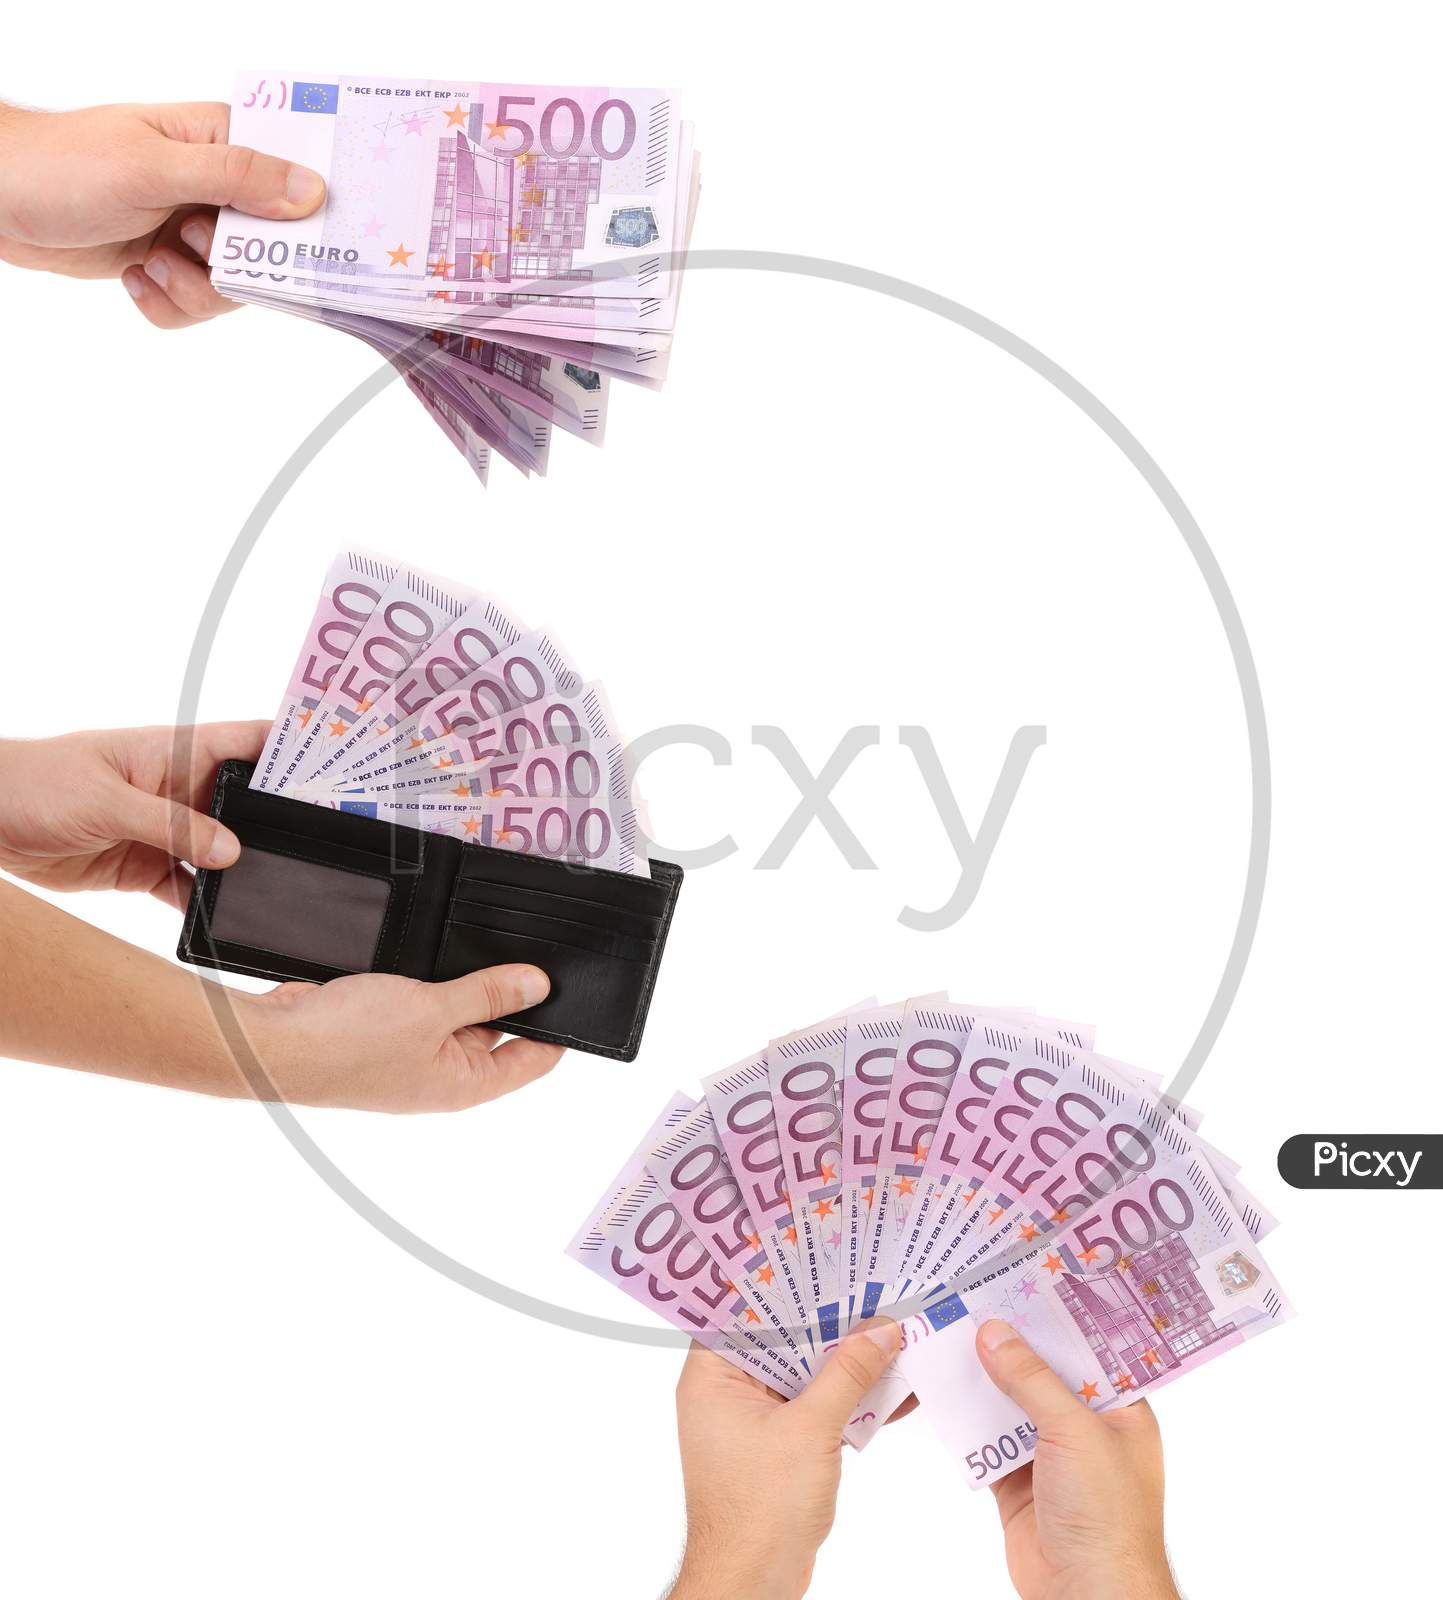 Hands holding a lot of banknotes in denominations of 500 euros.